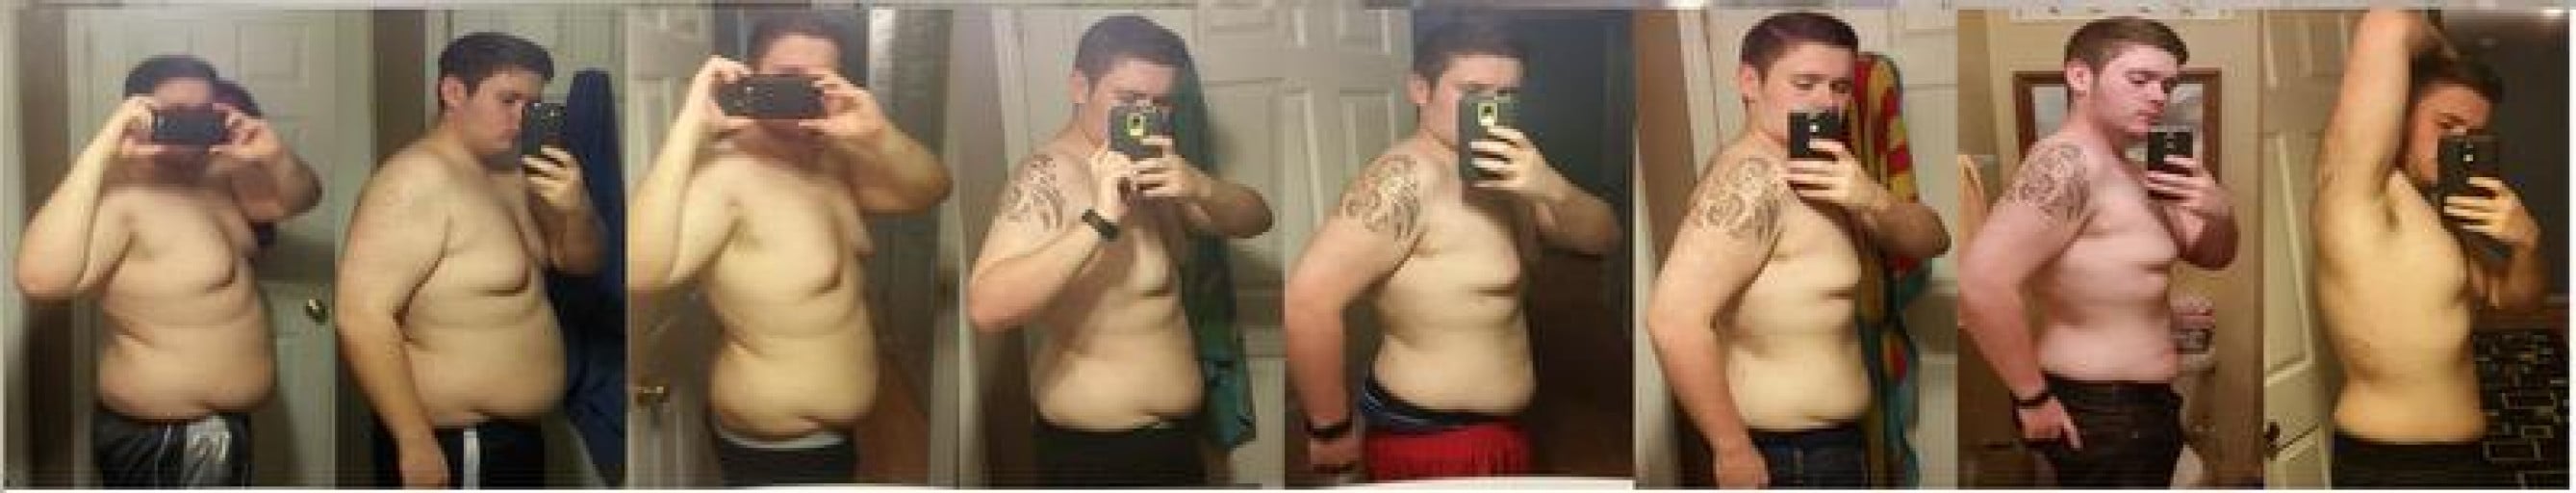 A before and after photo of a 5'10" male showing a weight cut from 280 pounds to 180 pounds. A respectable loss of 100 pounds.